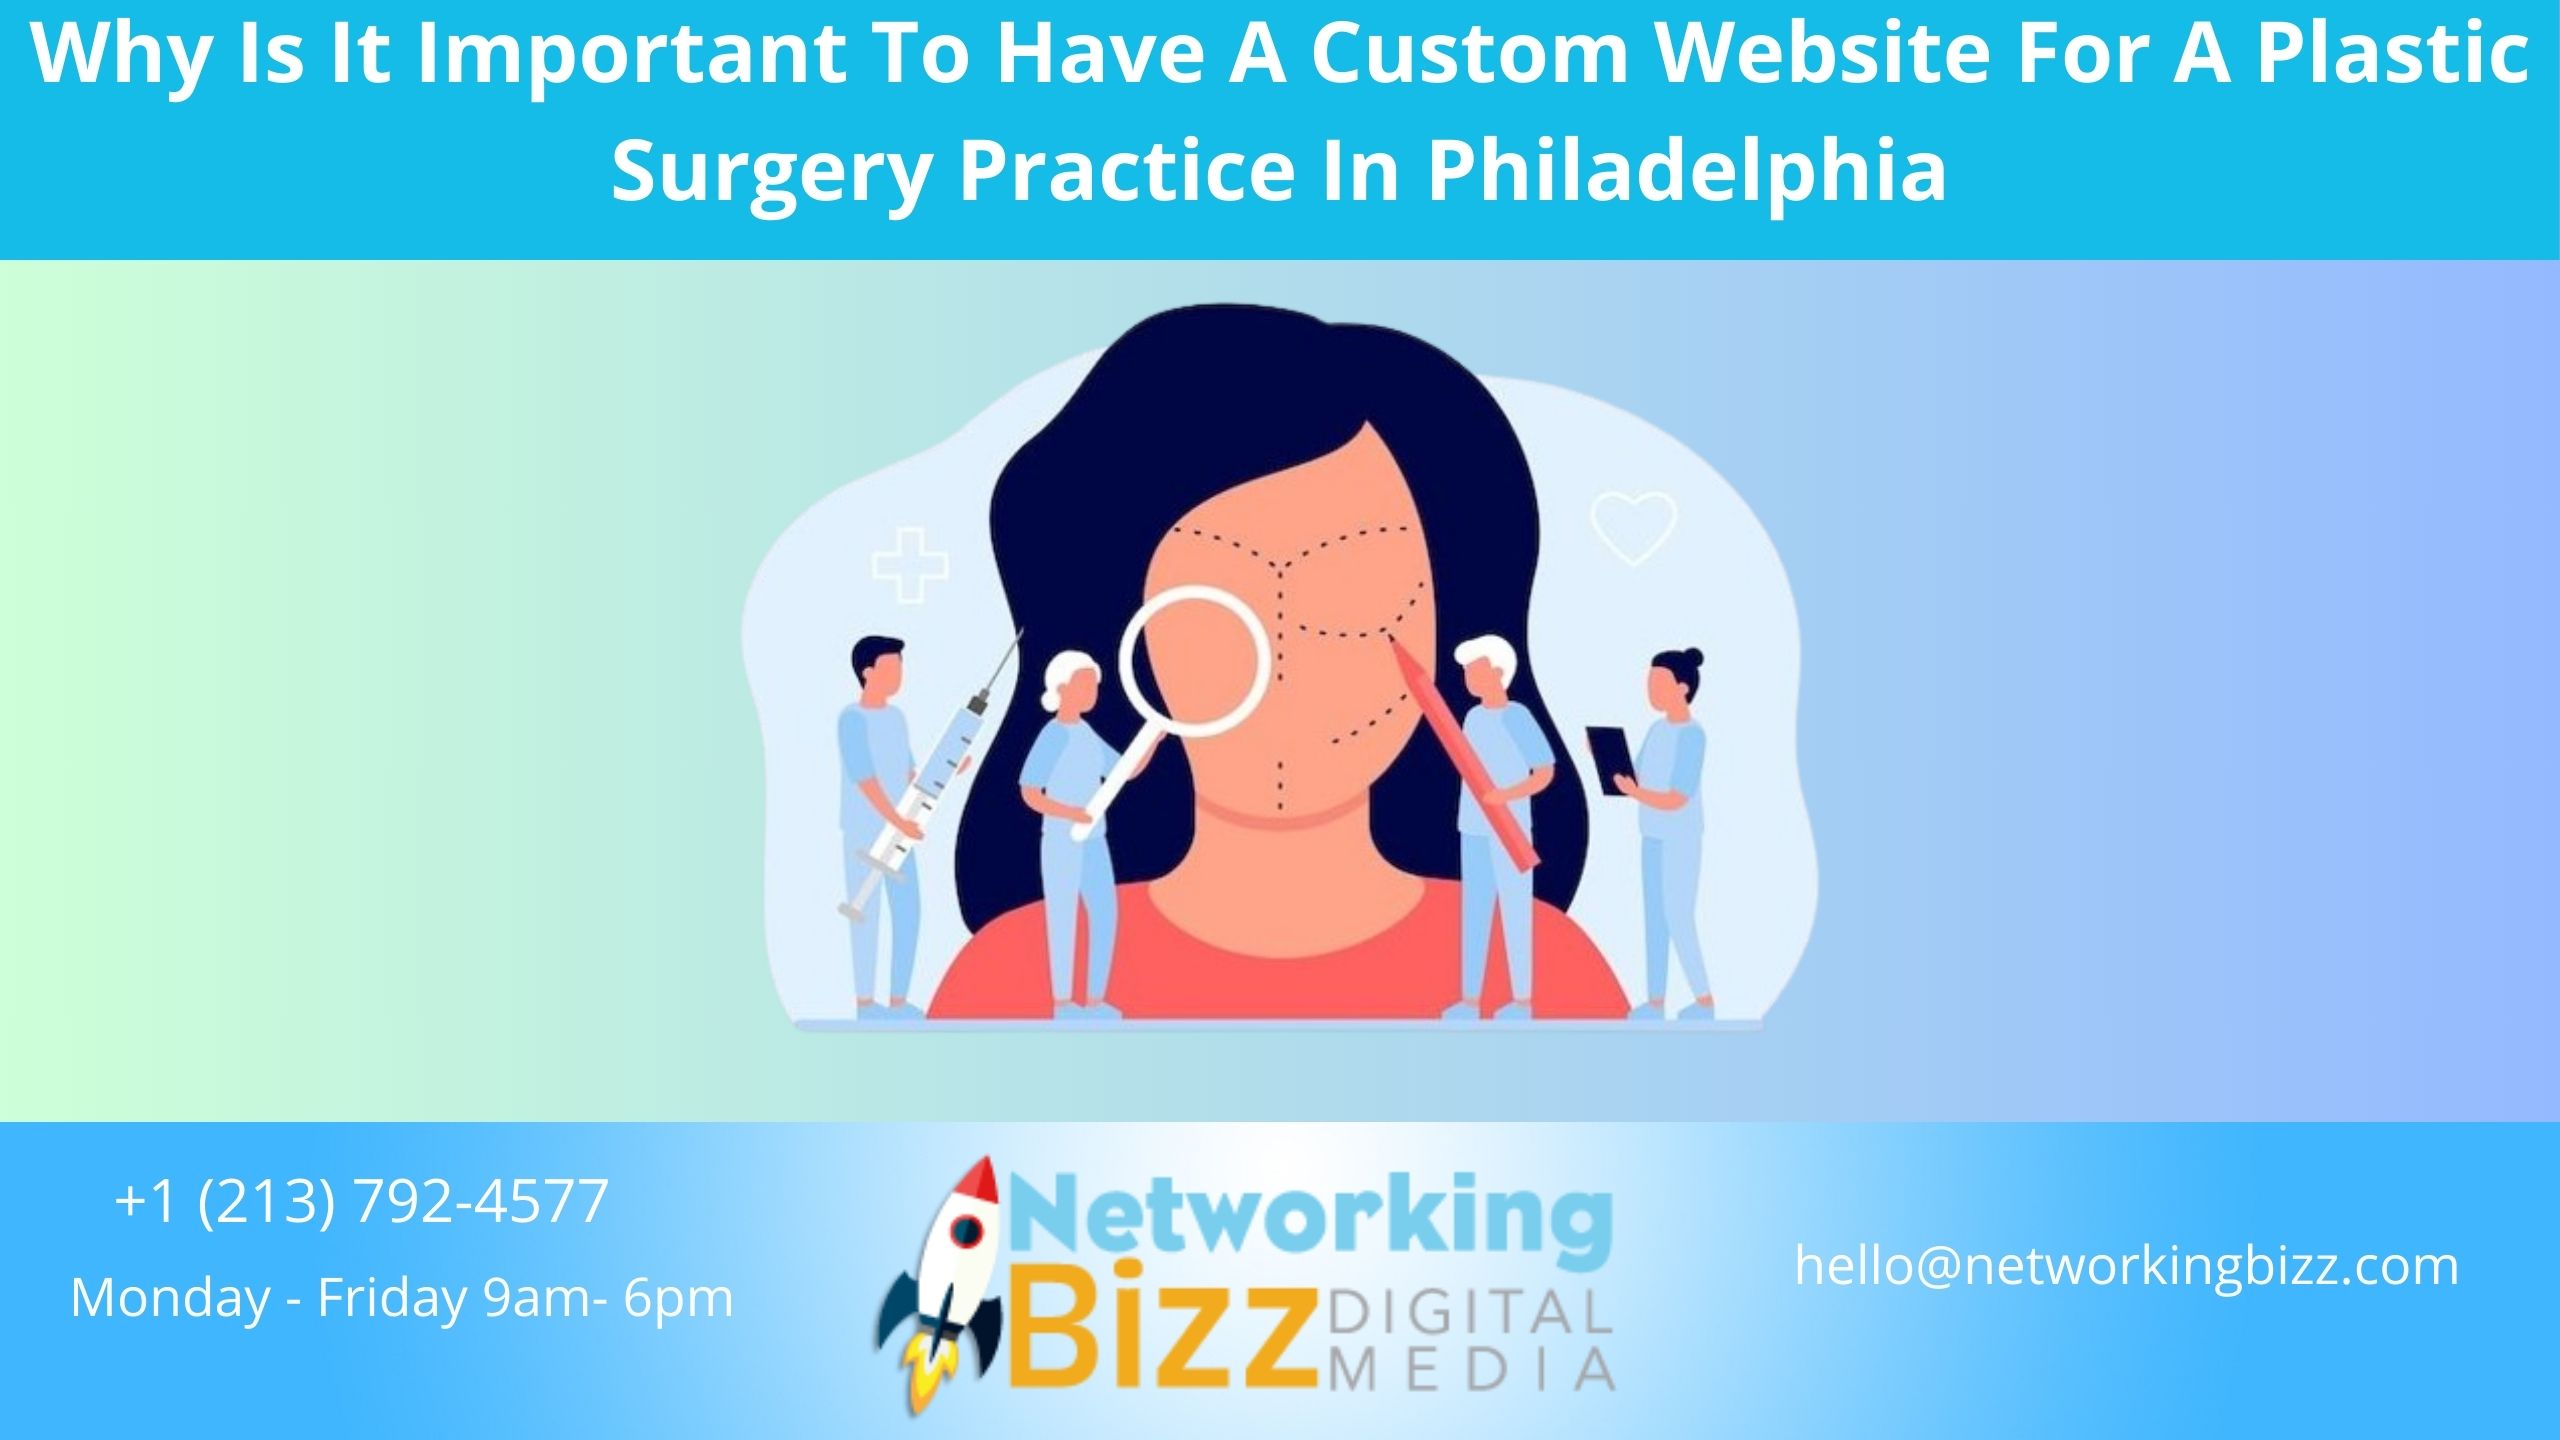 Why Is It Important To Have A Custom Website For A Plastic Surgery Practice In Philadelphia